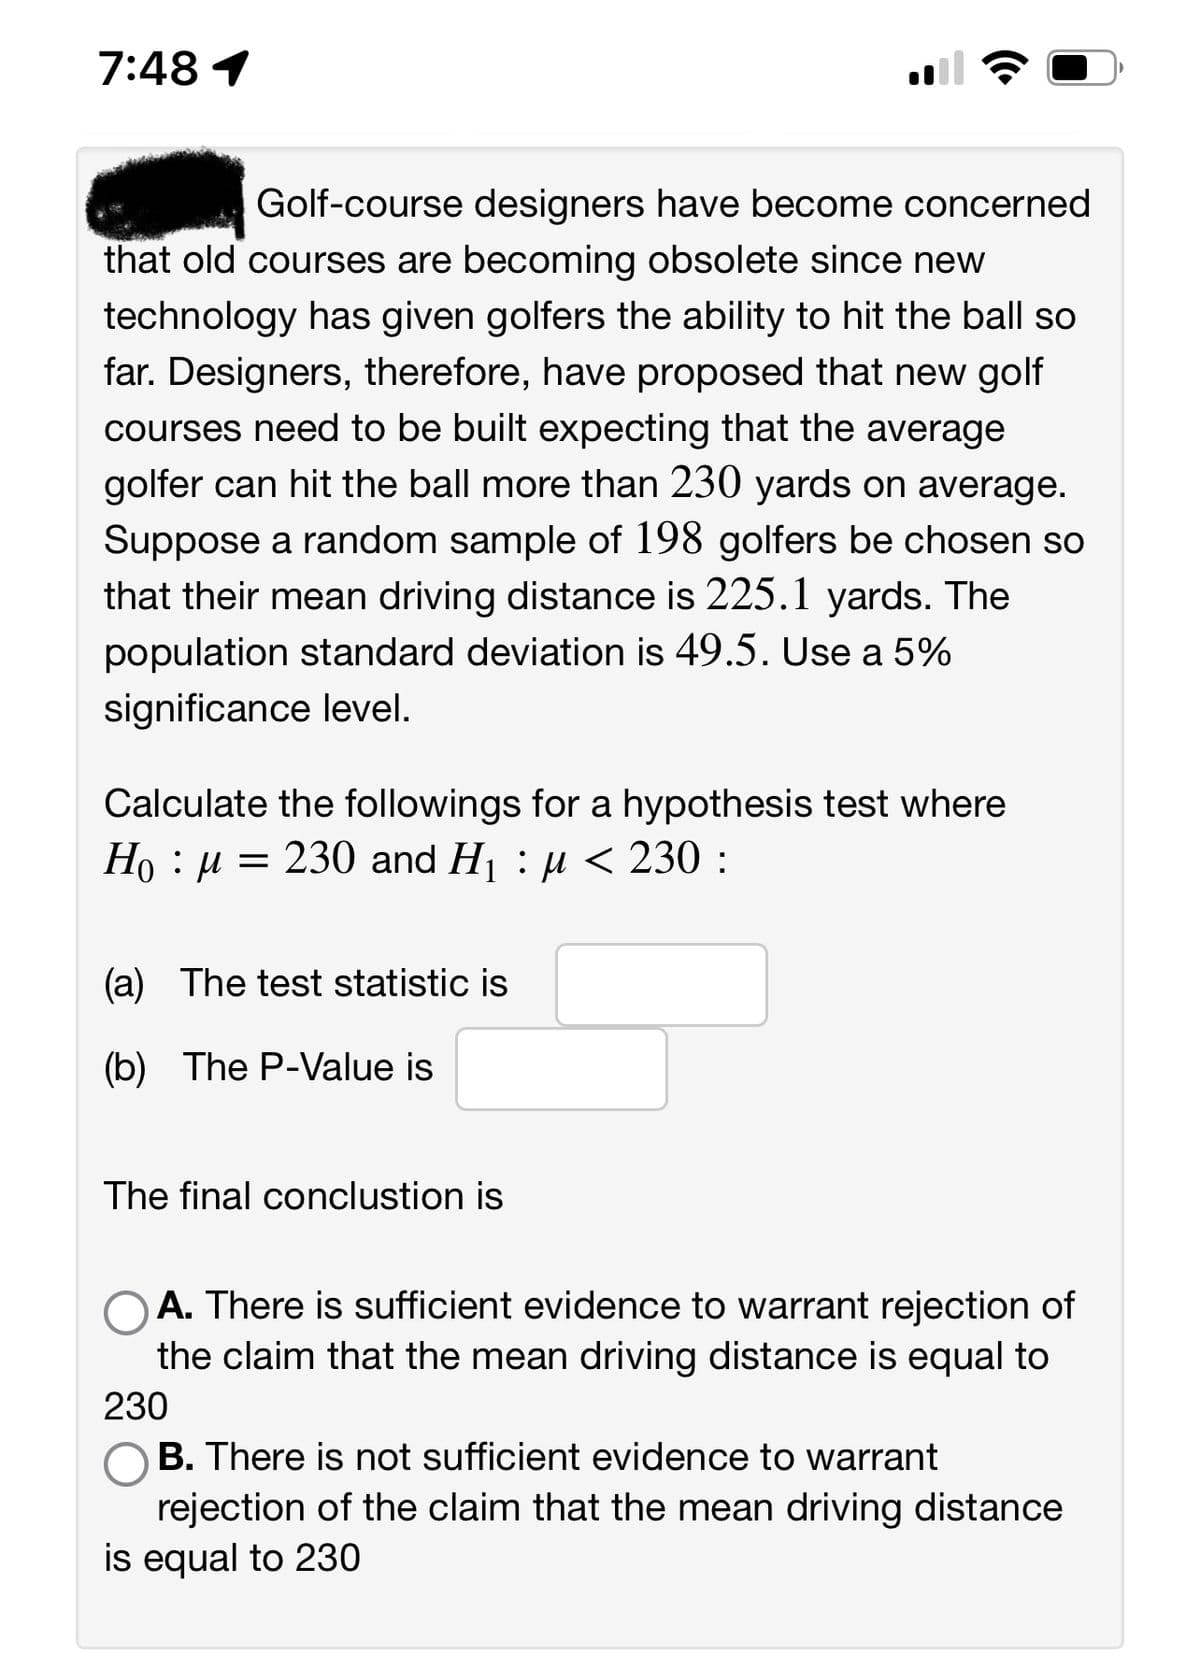 7:48 1
Golf-course designers have become concerned
that old courses are becoming obsolete since new
technology has given golfers the ability to hit the ball so
far. Designers, therefore, have proposed that new golf
courses need to be built expecting that the average
golfer can hit the ball more than 230 yards on average.
Suppose a random sample of 198 golfers be chosen so
that their mean driving distance is 225.1 yards. The
population standard deviation is 49.5. Use a 5%
significance level.
Calculate the followings for a hypothesis test where
Ho μ = 230 and H₁ : µ< 230 :
:
(a) The test statistic is
(b) The P-Value is
The final conclustion is
A. There is sufficient evidence to warrant rejection of
the claim that the mean driving distance is equal to
230
B. There is not sufficient evidence to warrant
rejection of the claim that the mean driving distance
is equal to 230